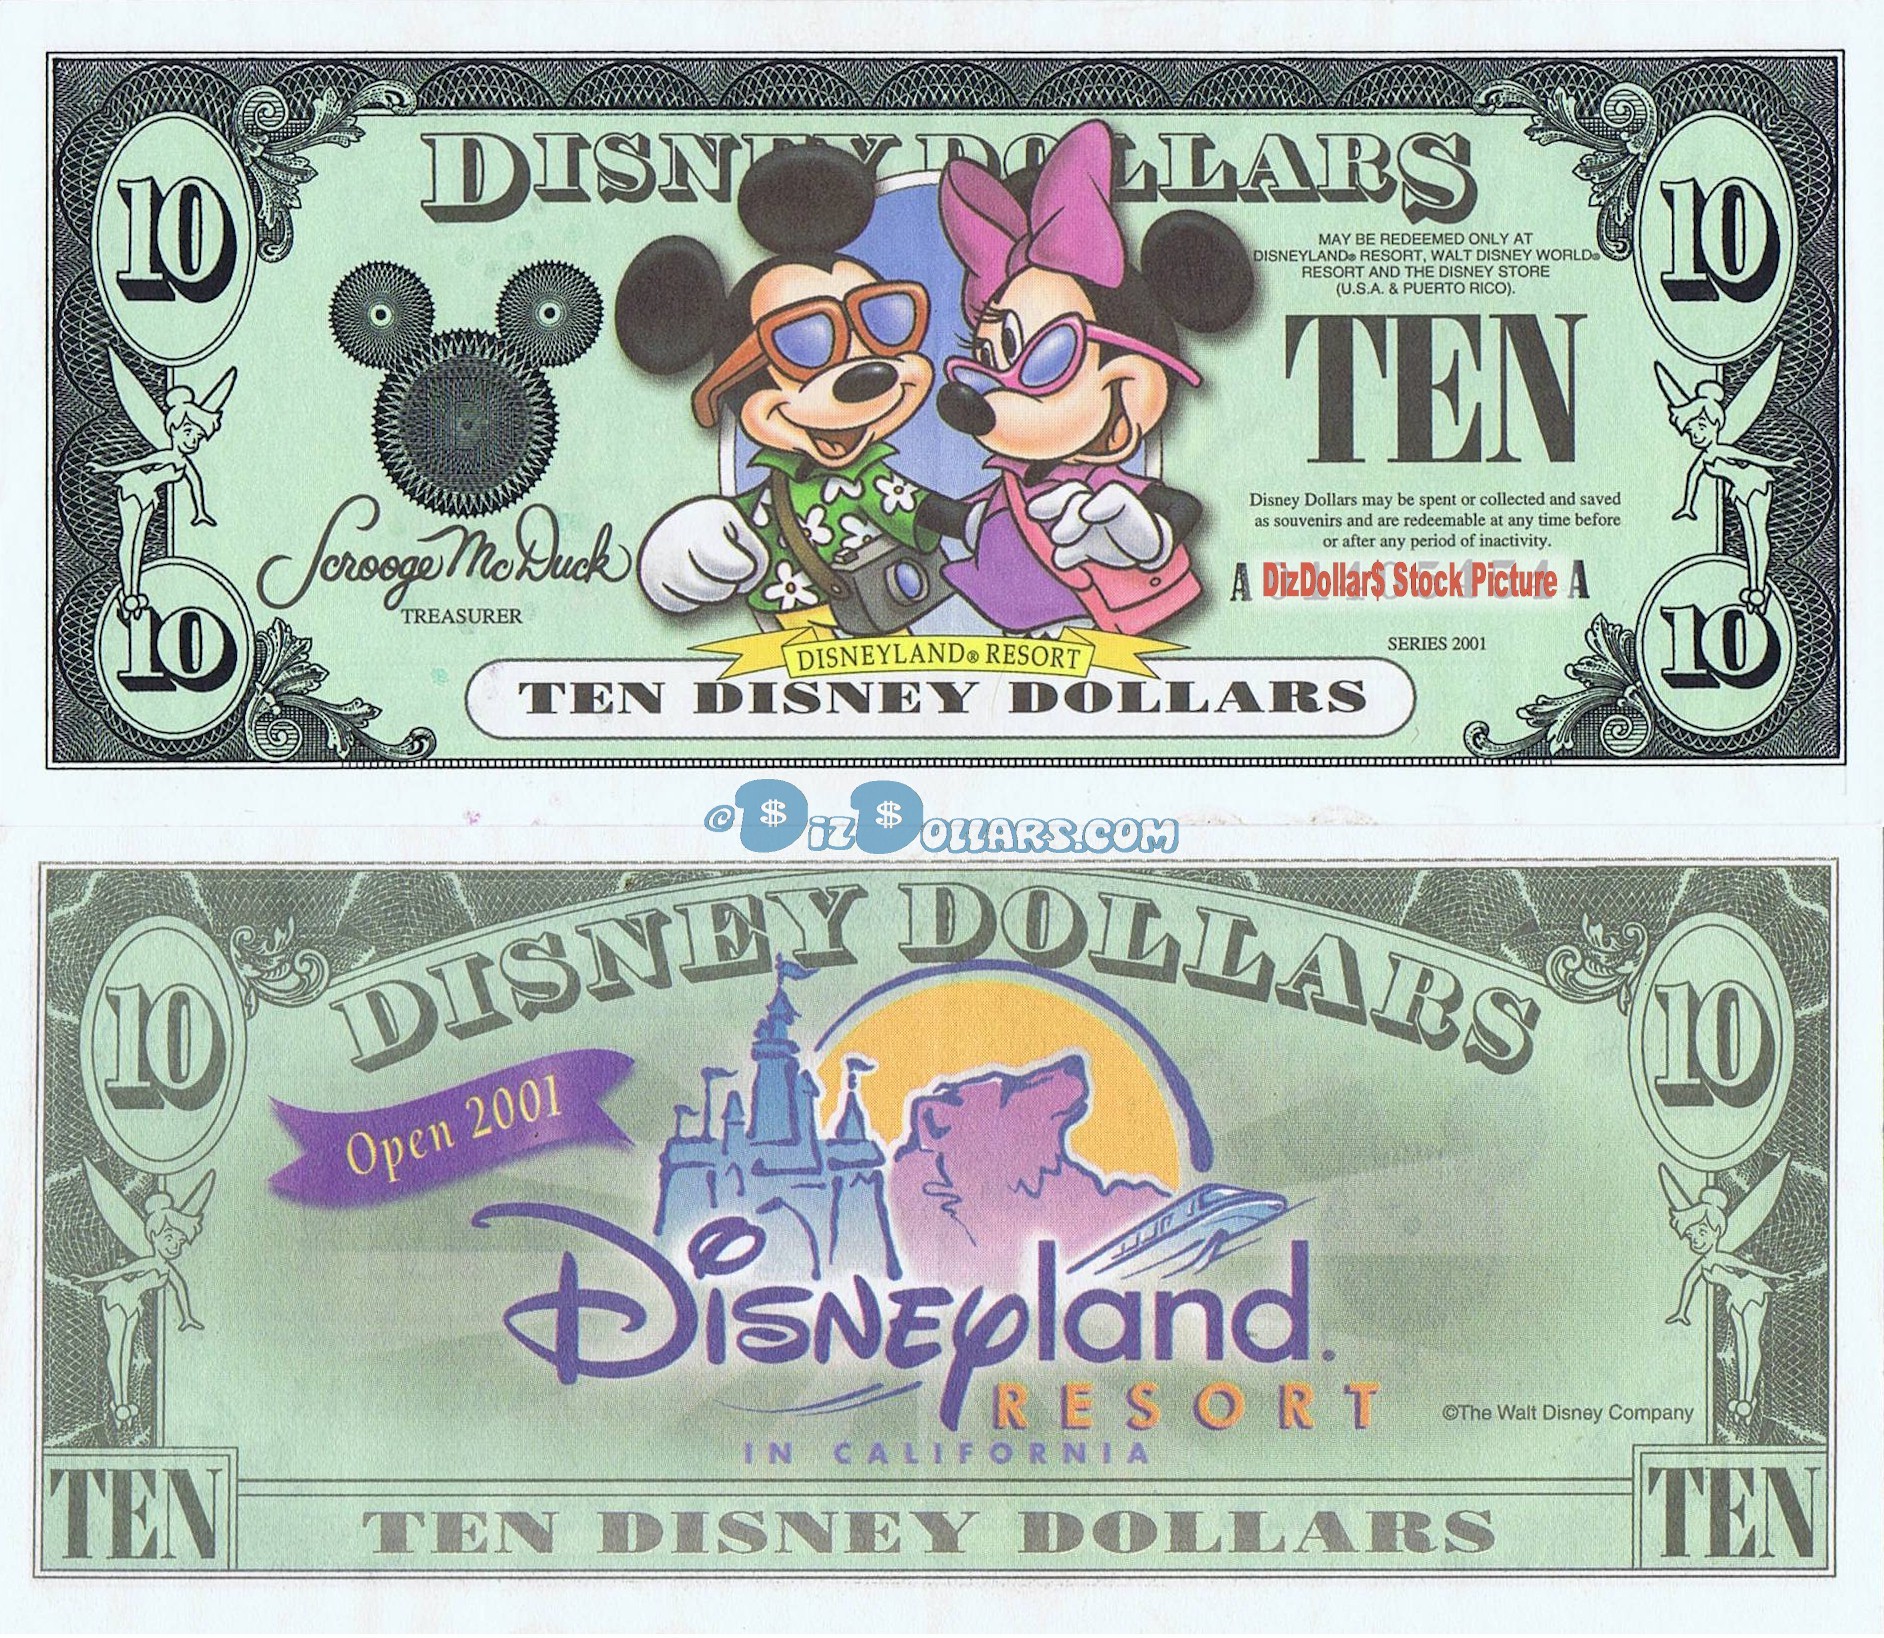 2001 "A" $10 UNC 3 Consecutive S/N A00452013A - 015A Disney Dollar - Tourists Mickey and Minnie front with Disneyland Resort on back - Disneyland Resort Series from Disneyland ~ © DizDollars.com